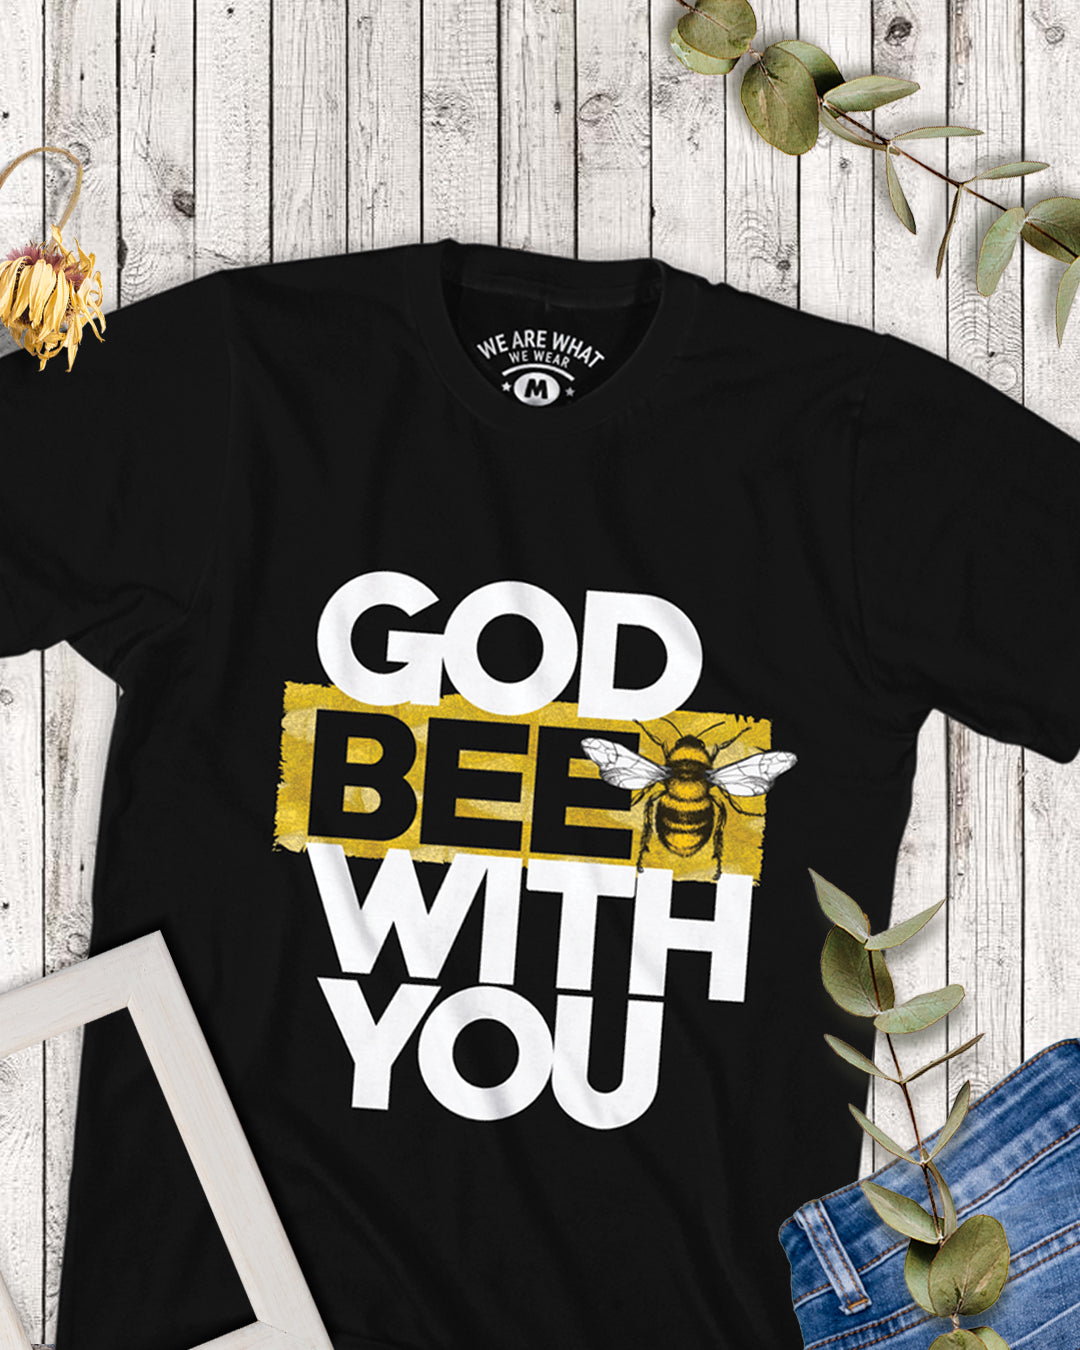 God bee with you